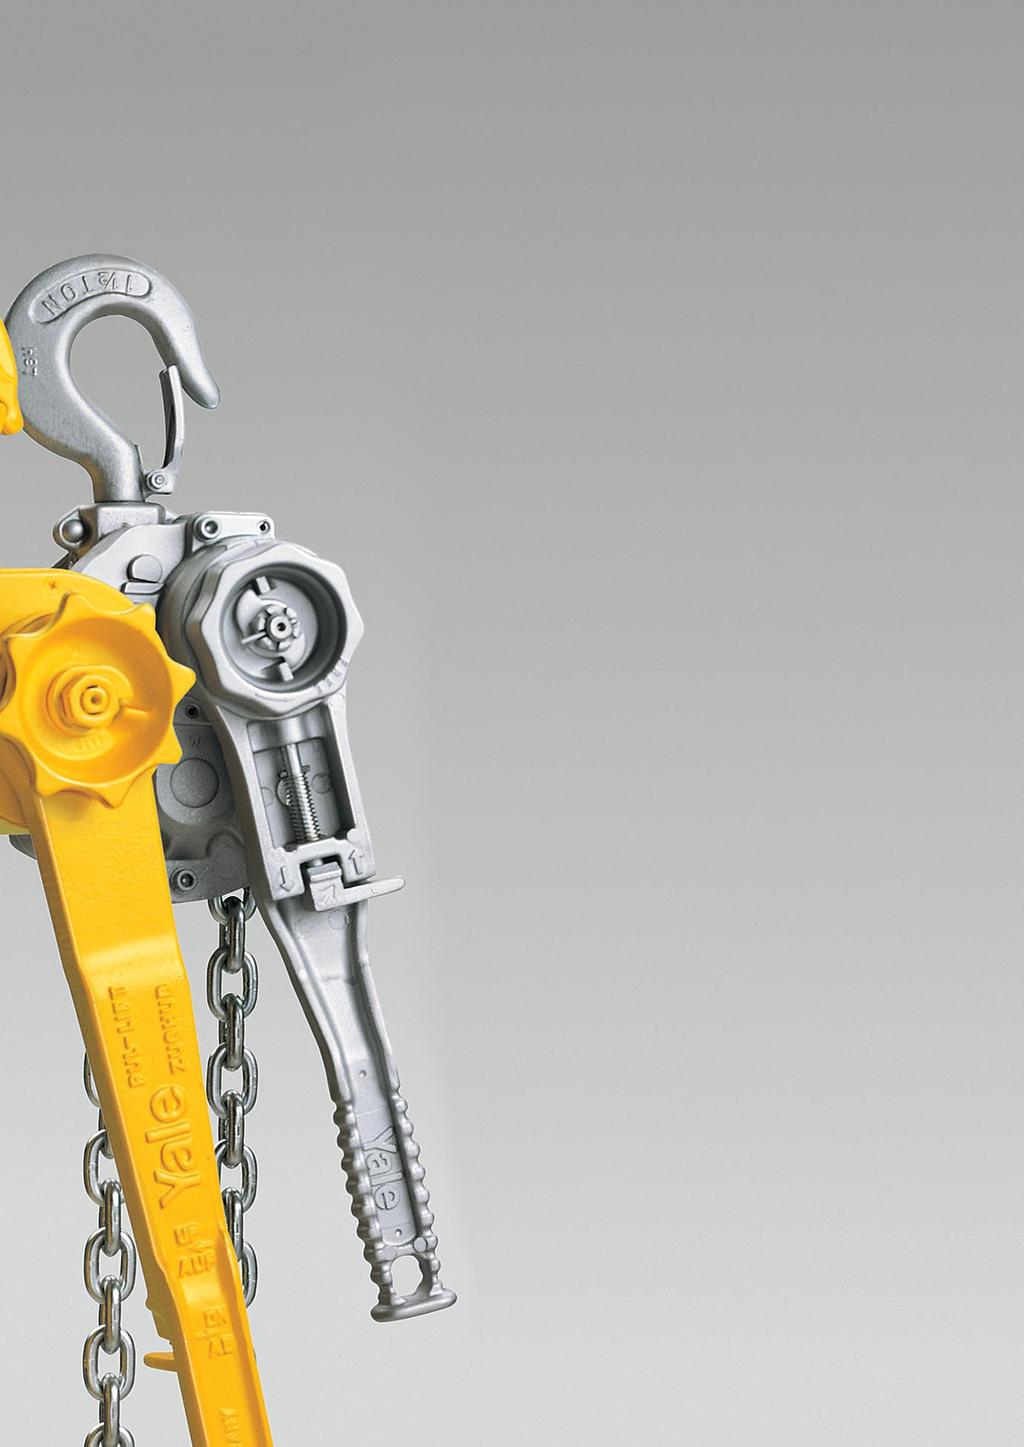 lever hoists Ratchet for lifting, pulling, lashing and tensioning Yale Hand Lever Hoists are versatile, portable units for pulling, tensioning, lashing and lifting of loads.